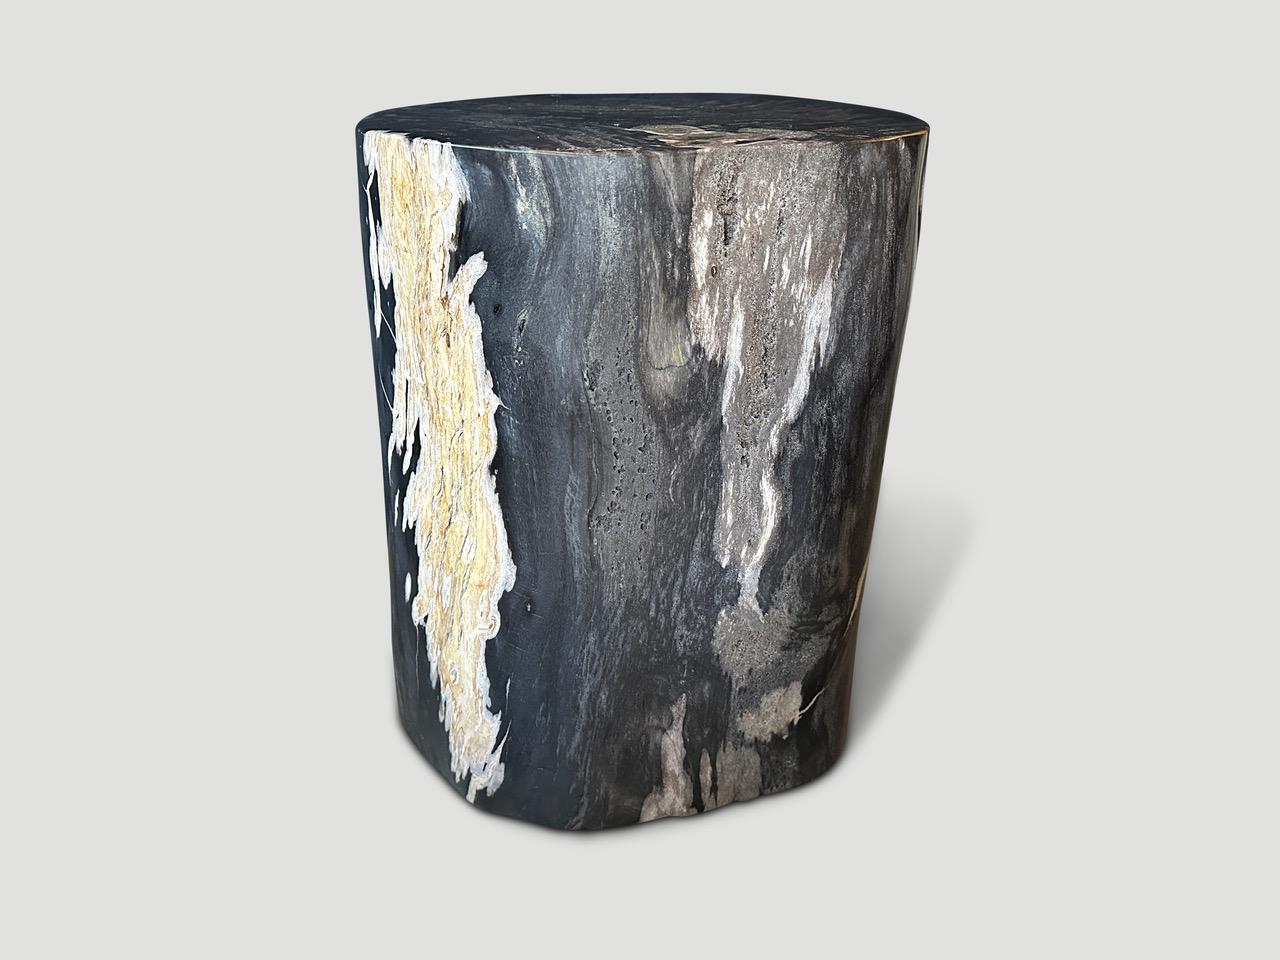 Beautiful dramatic tones and markings on this impressive high quality petrified wood side table. It’s fascinating how Mother Nature produces these exquisite 40 million year old petrified teak logs with such contrasting colors and natural patterns